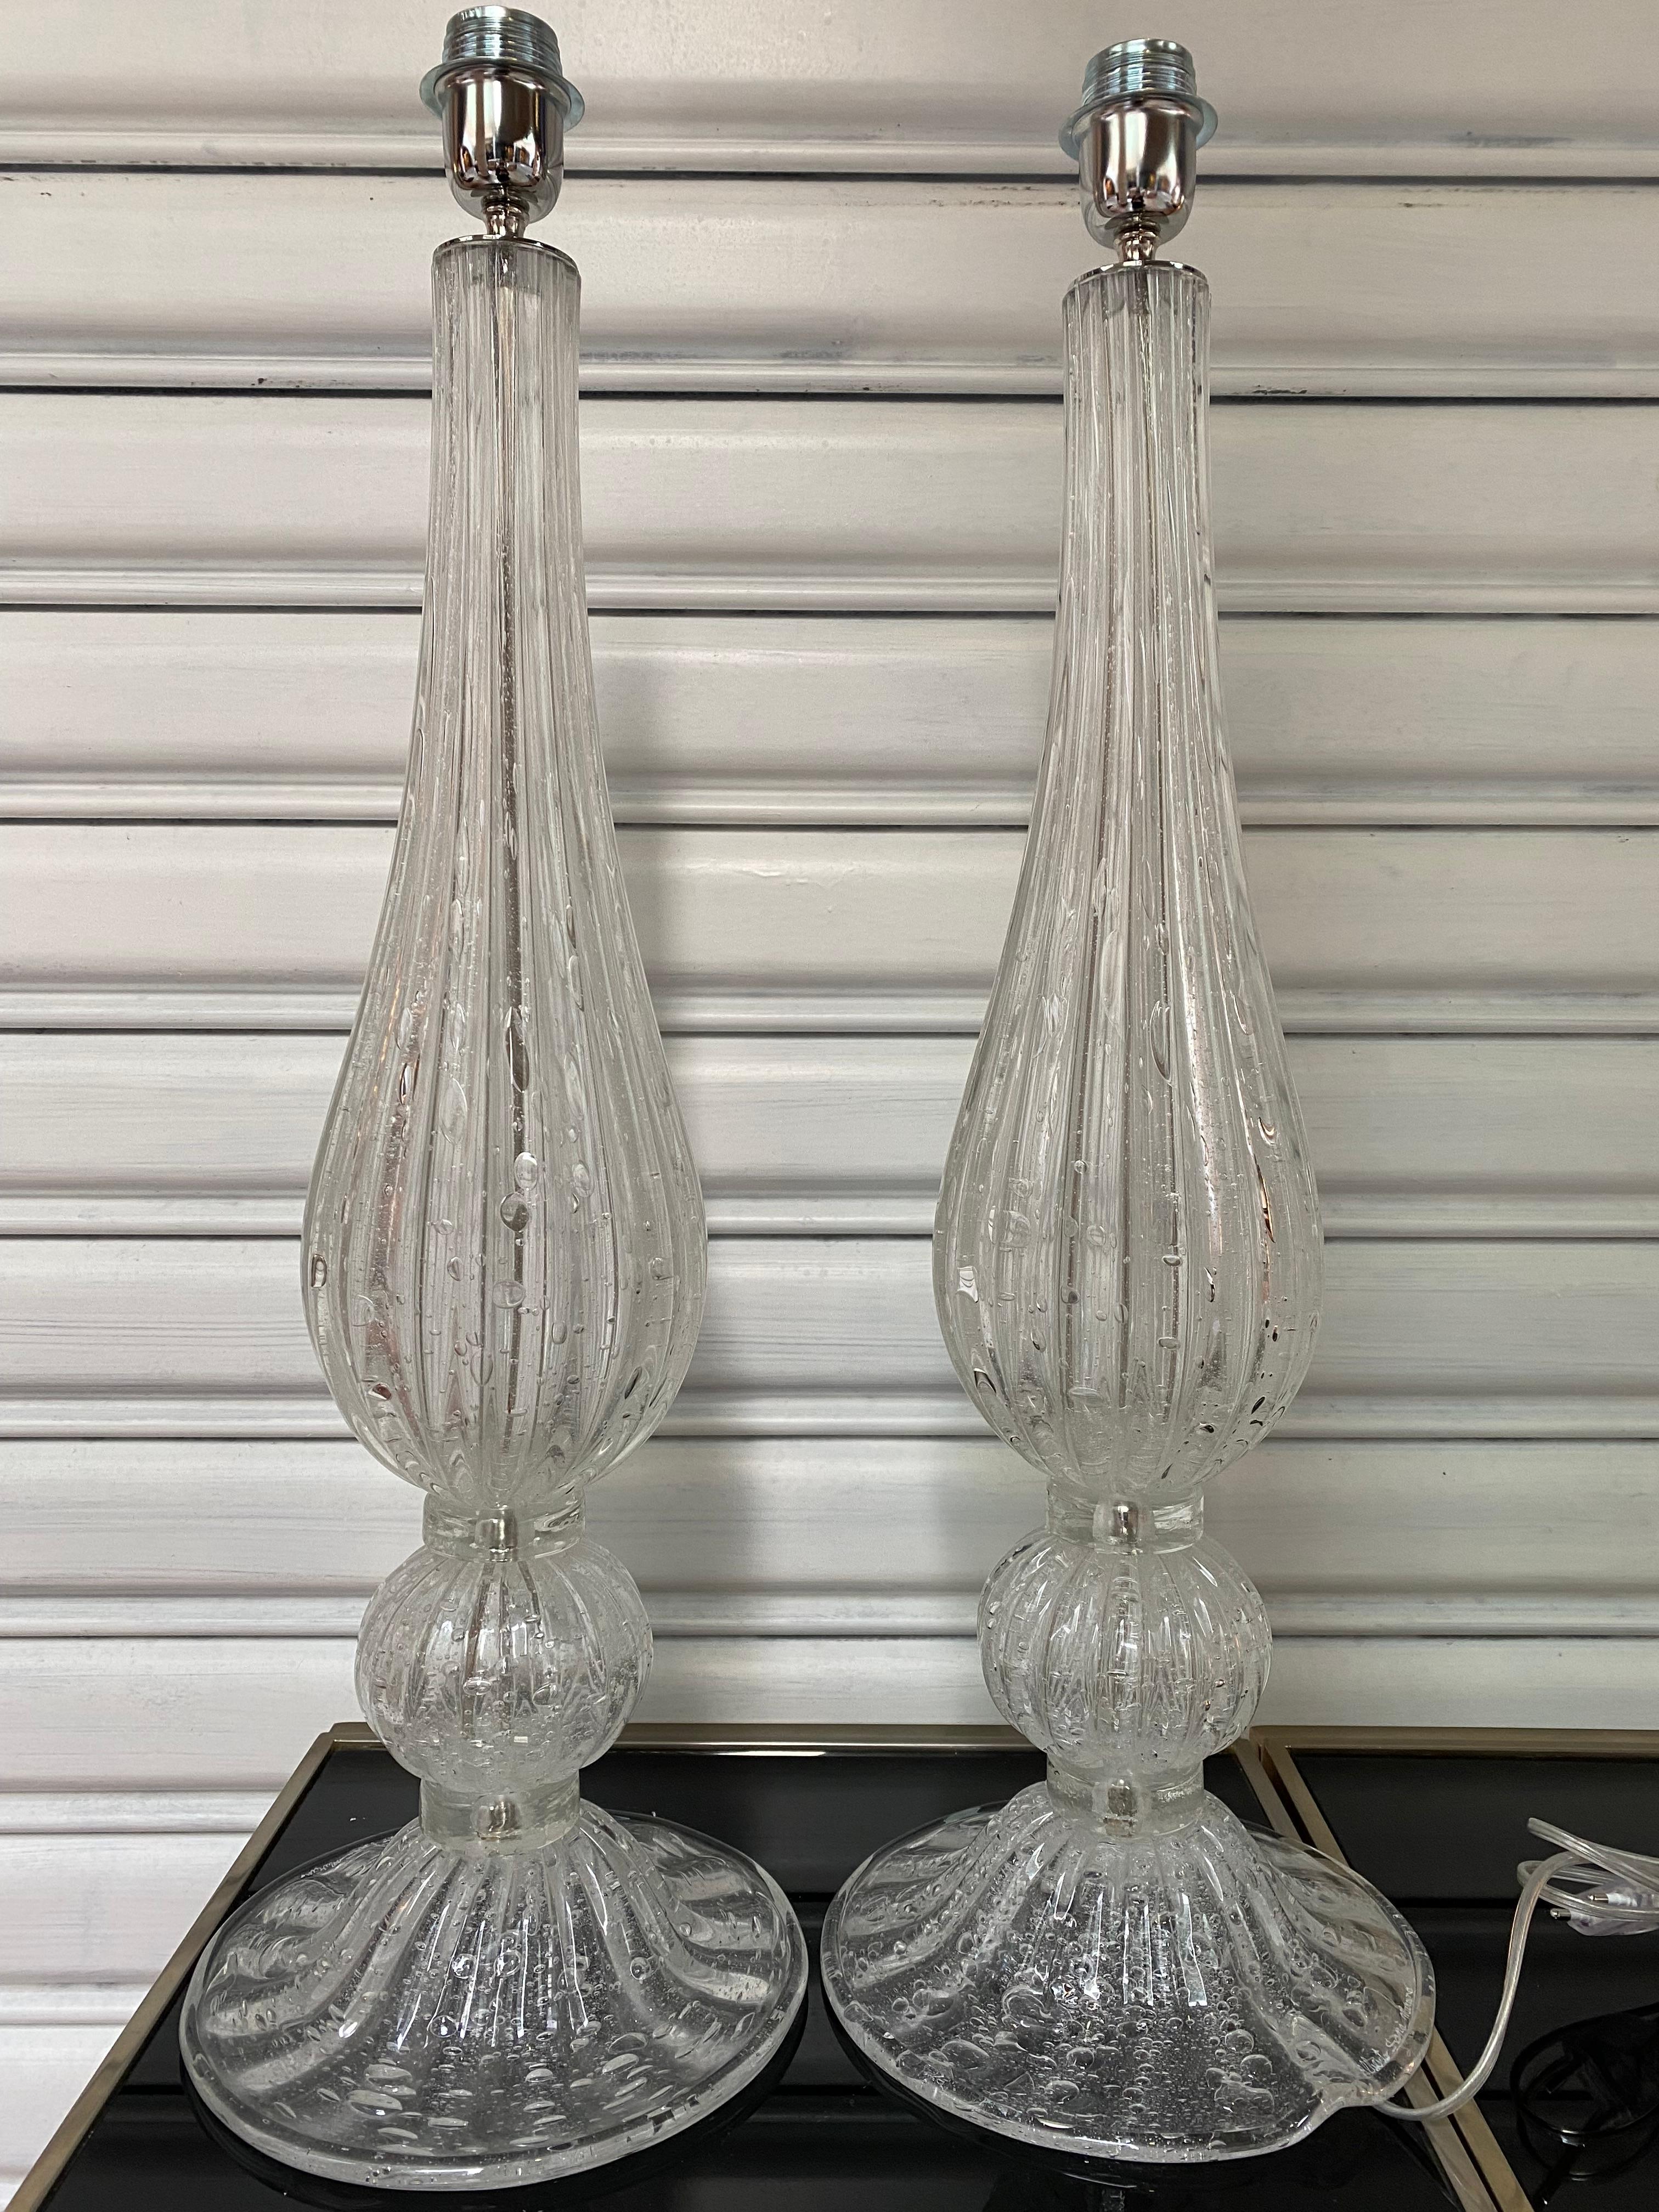 Pair of silver and transparent lamps Alberto Dona Murano (3 and 4)
Circa 1970
Signed on the foot 
Dimensions : h72x23cm

Price : 3700 € for the pair.
 